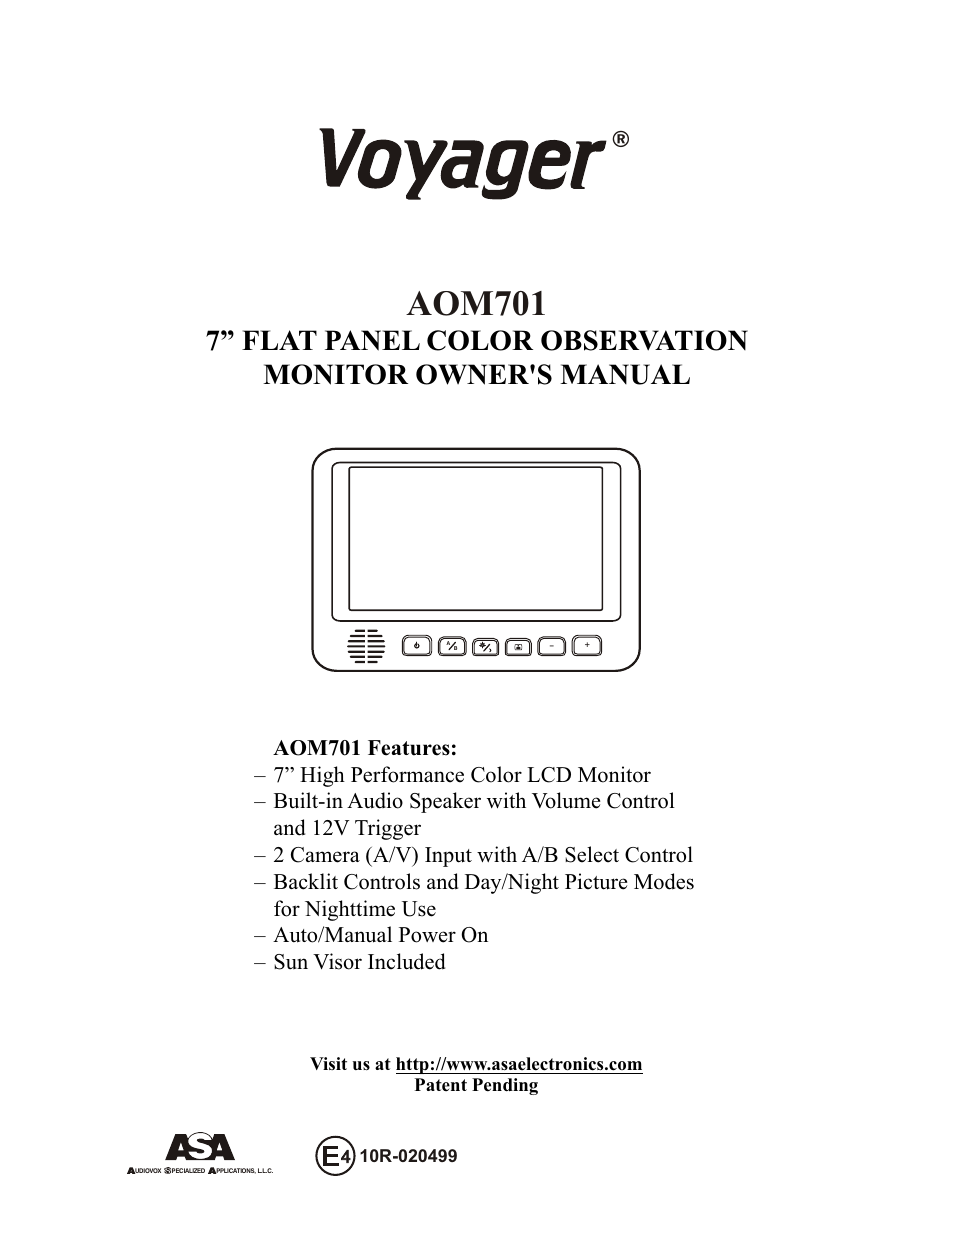 ASA Electronics Voyager AOM701 User Manual | 12 pages